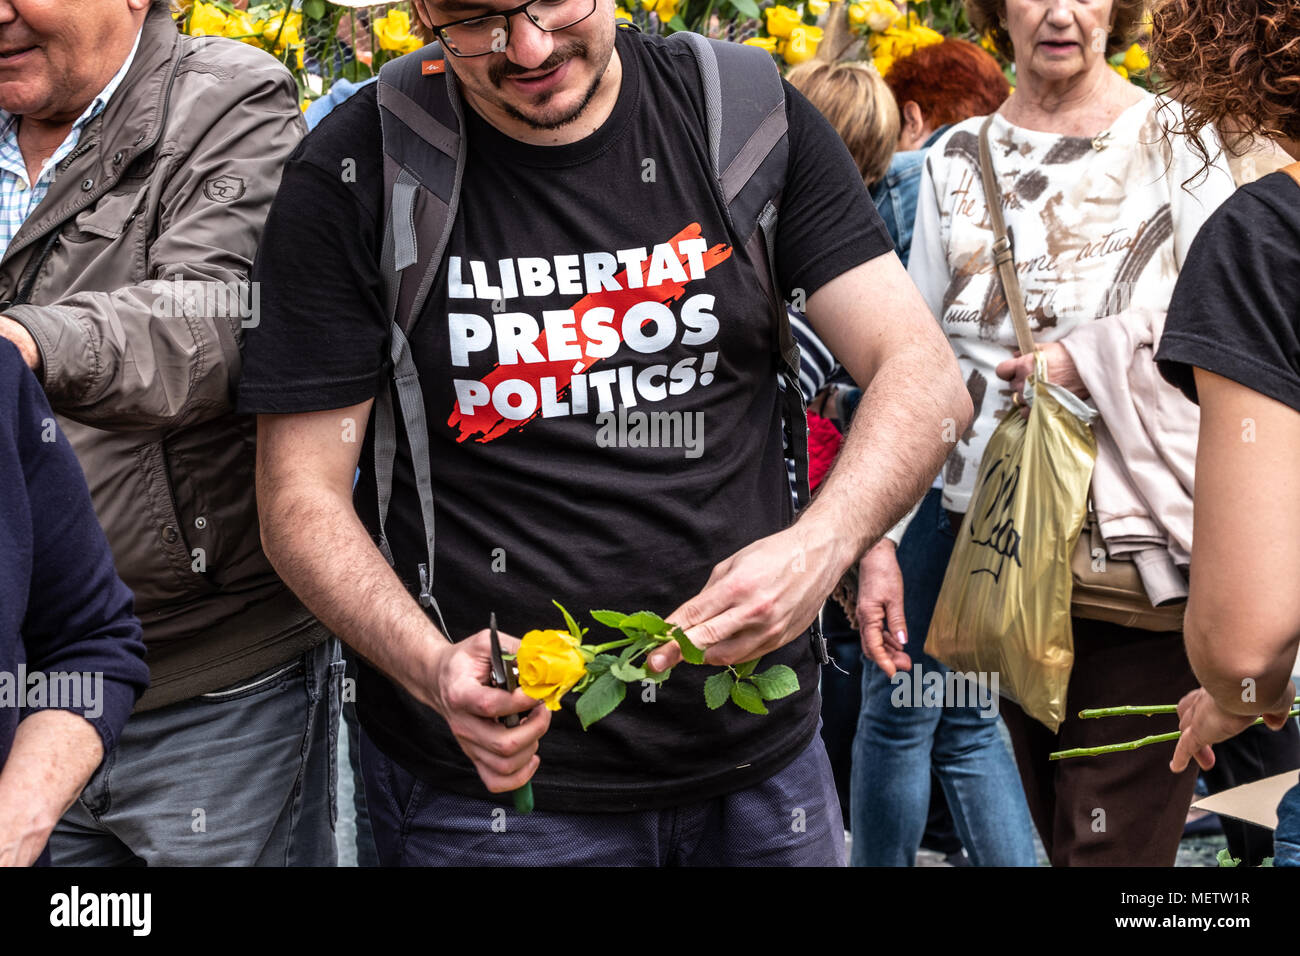 Barcelona, Catalonia, Spain. 23rd Apr, 2018. A young man is seen preparing yellow roses wearing a T-shirt to support political prisoners.Catalunya celebrates the ''Day of Sant Jordi'', the day of books and roses. Catalunya hopes to reach the figure of 7 million roses sold. It is tradition to give a rose or a book among lovers. Numerous literary authors sign their books to the public on the street. Credit: ZUMA Press, Inc./Alamy Live News Stock Photo